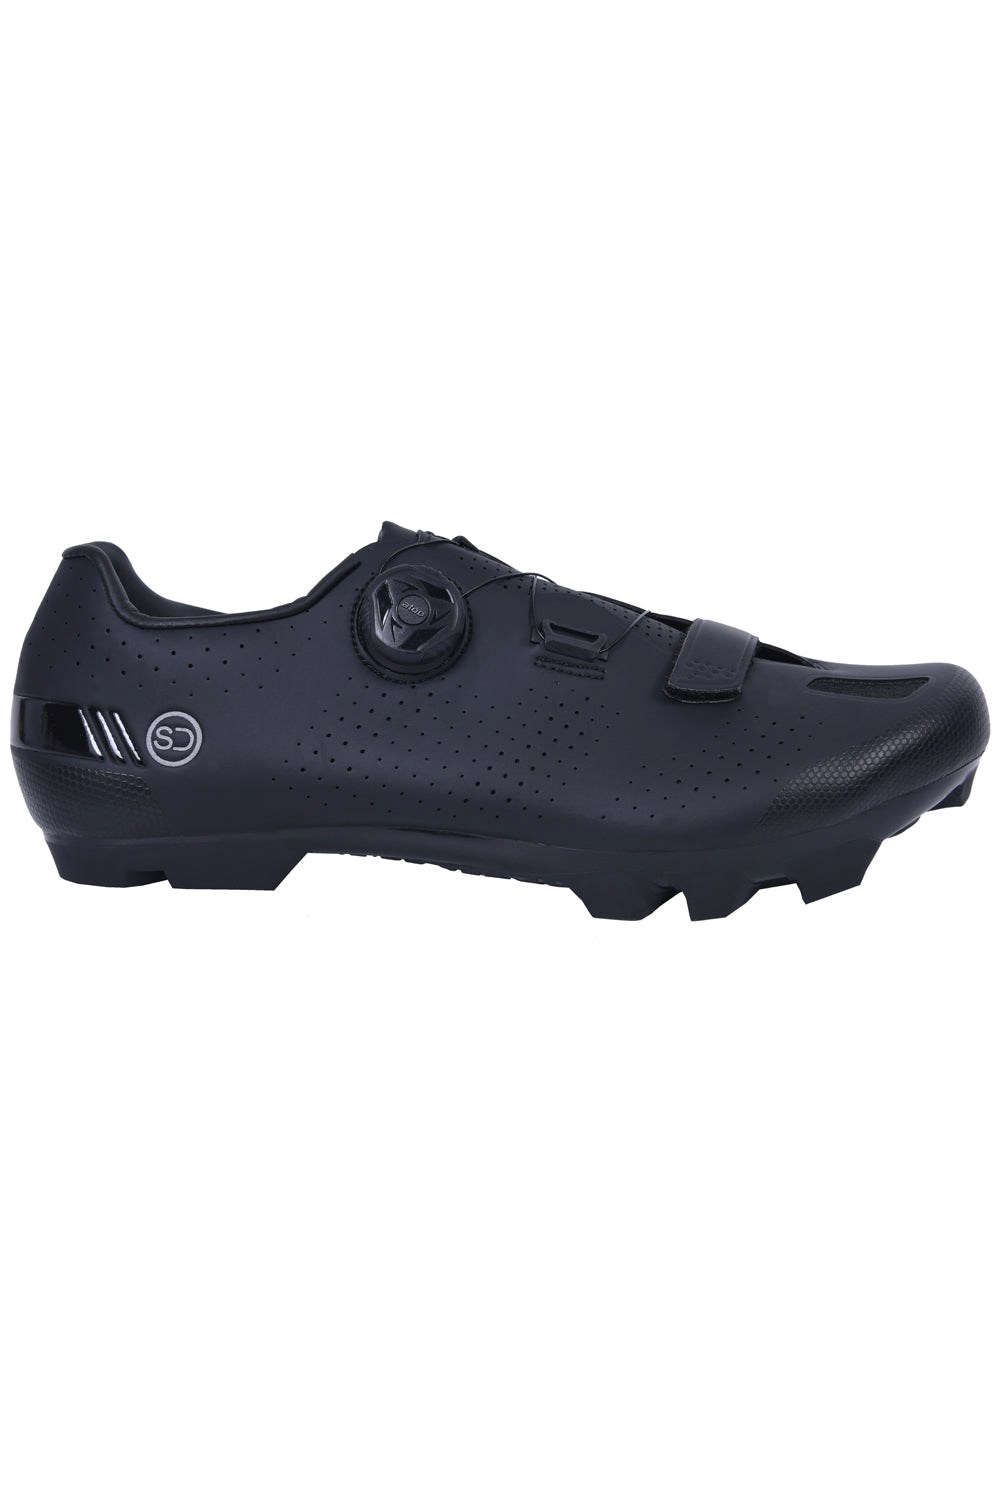 S-M1 Pro MTB Cycle Shoes -